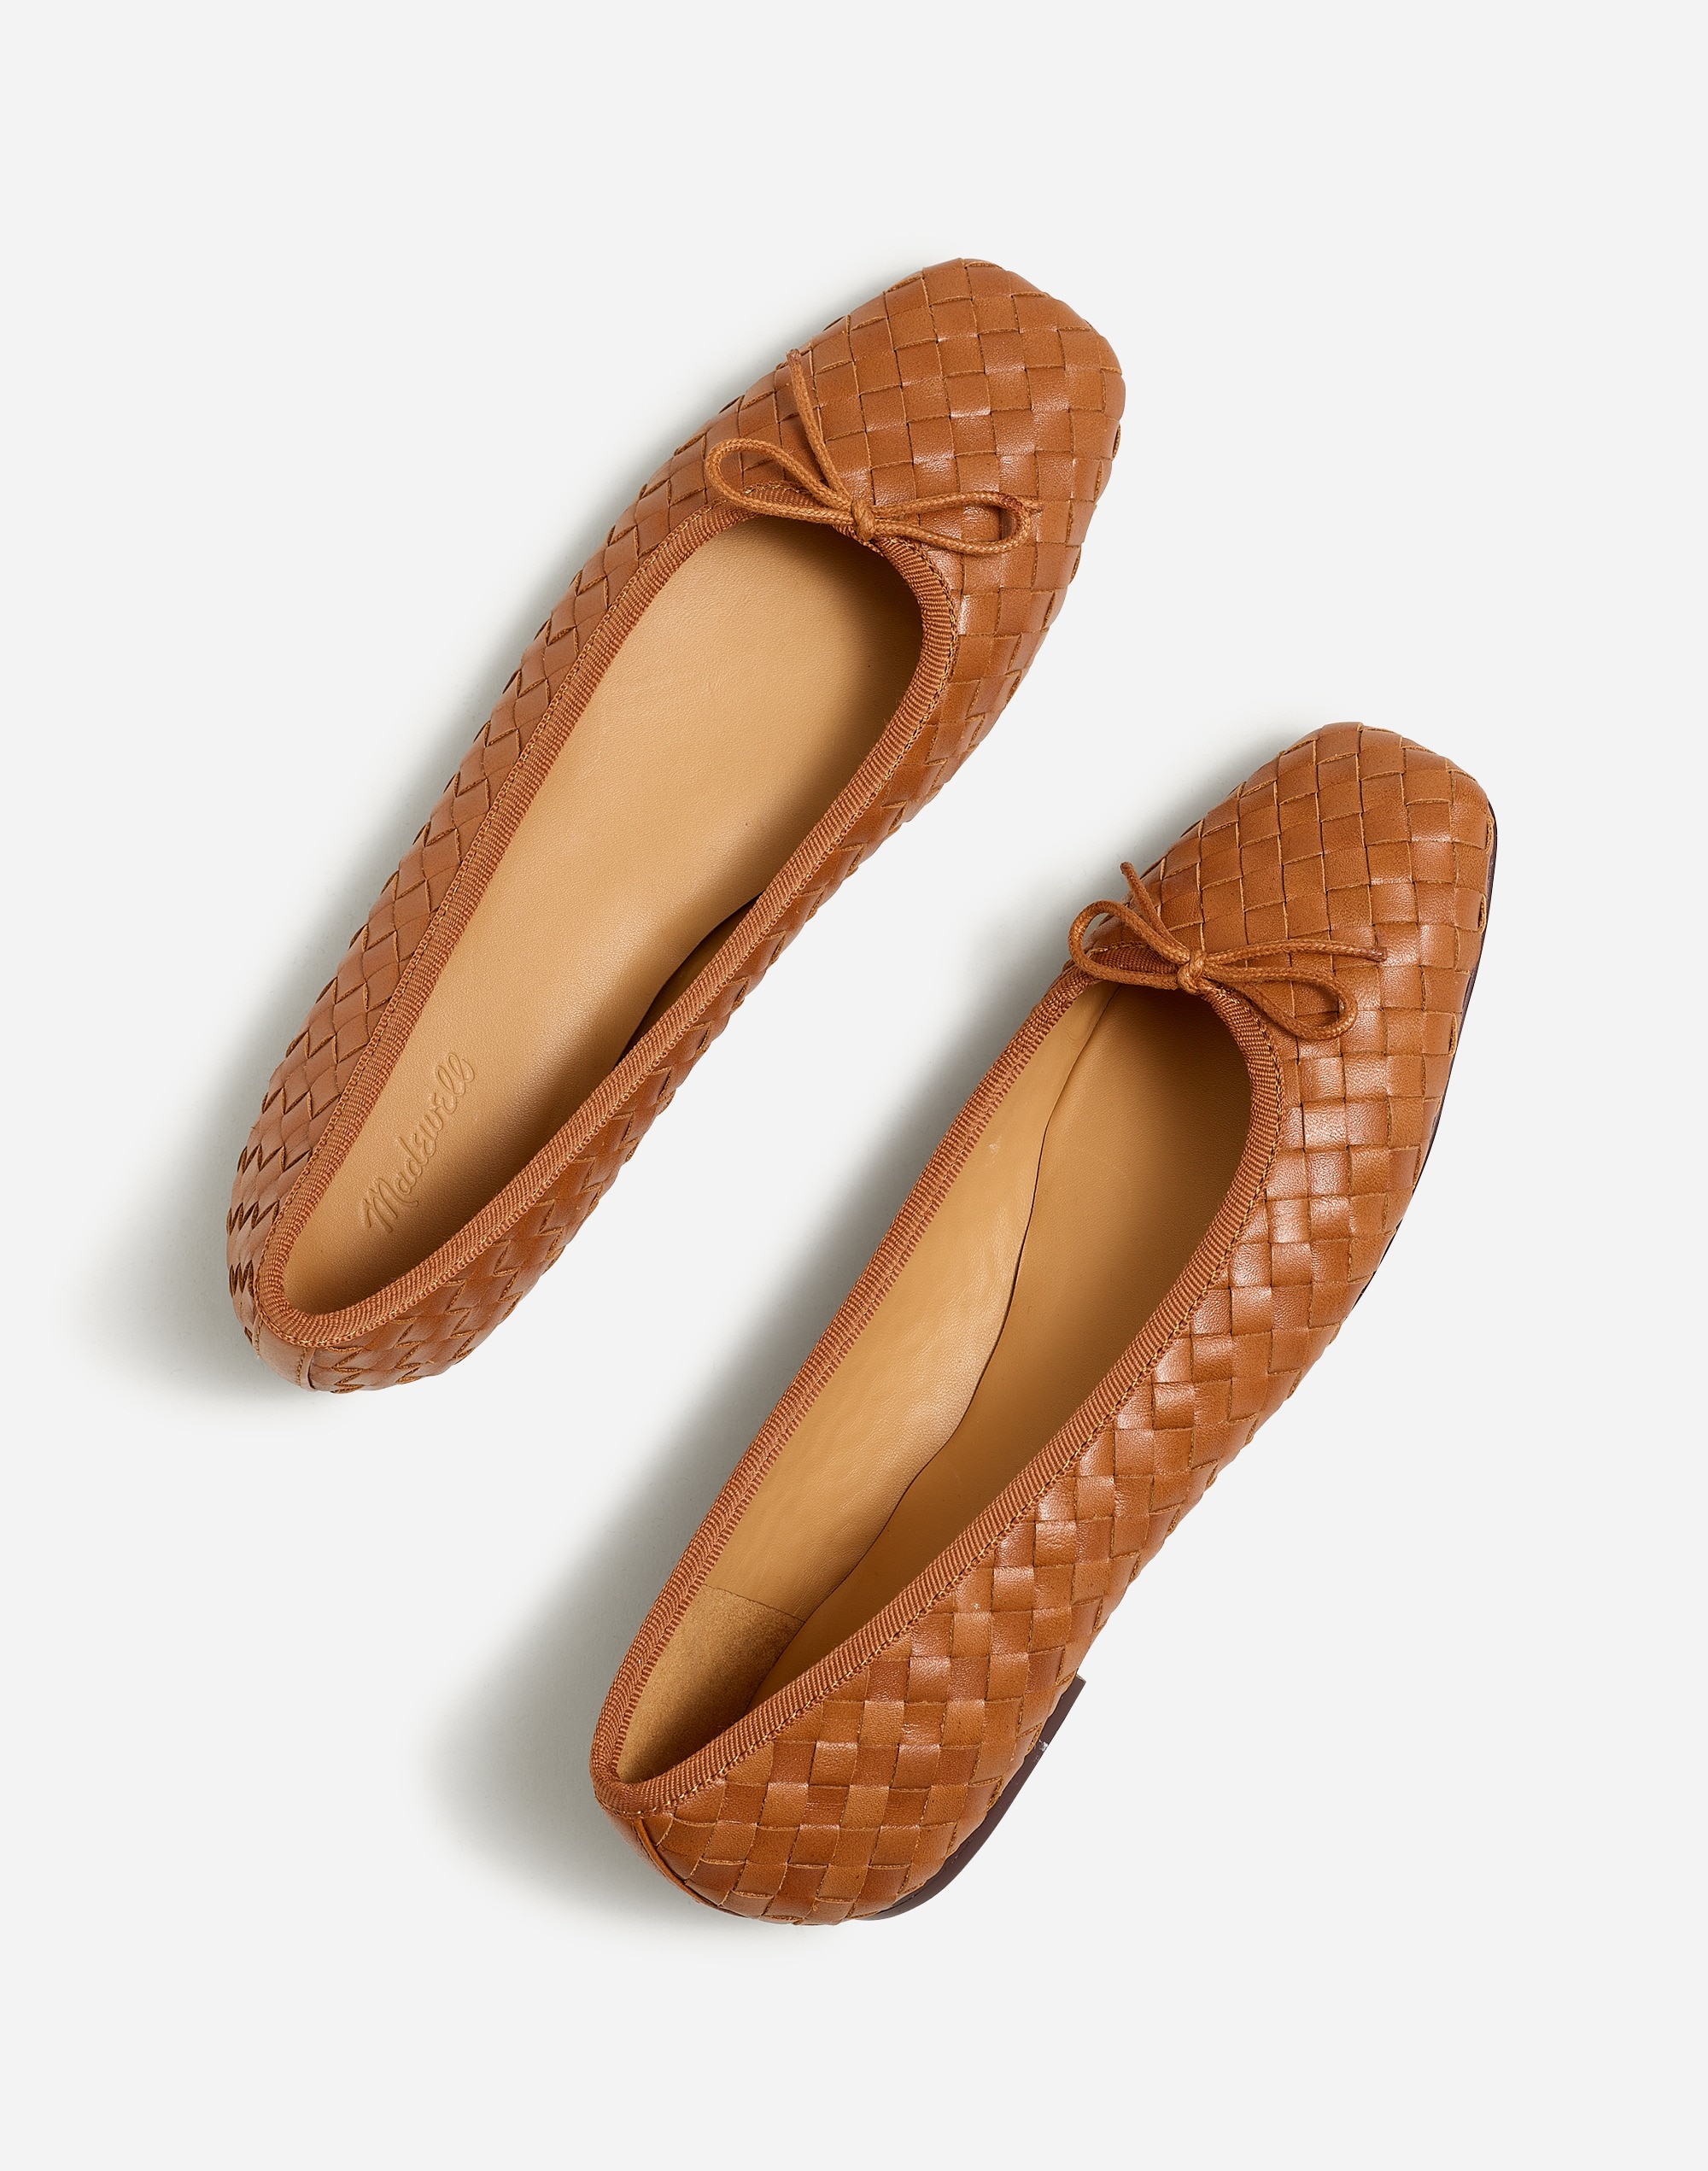 The Anelise Ballet Flat Woven Leather